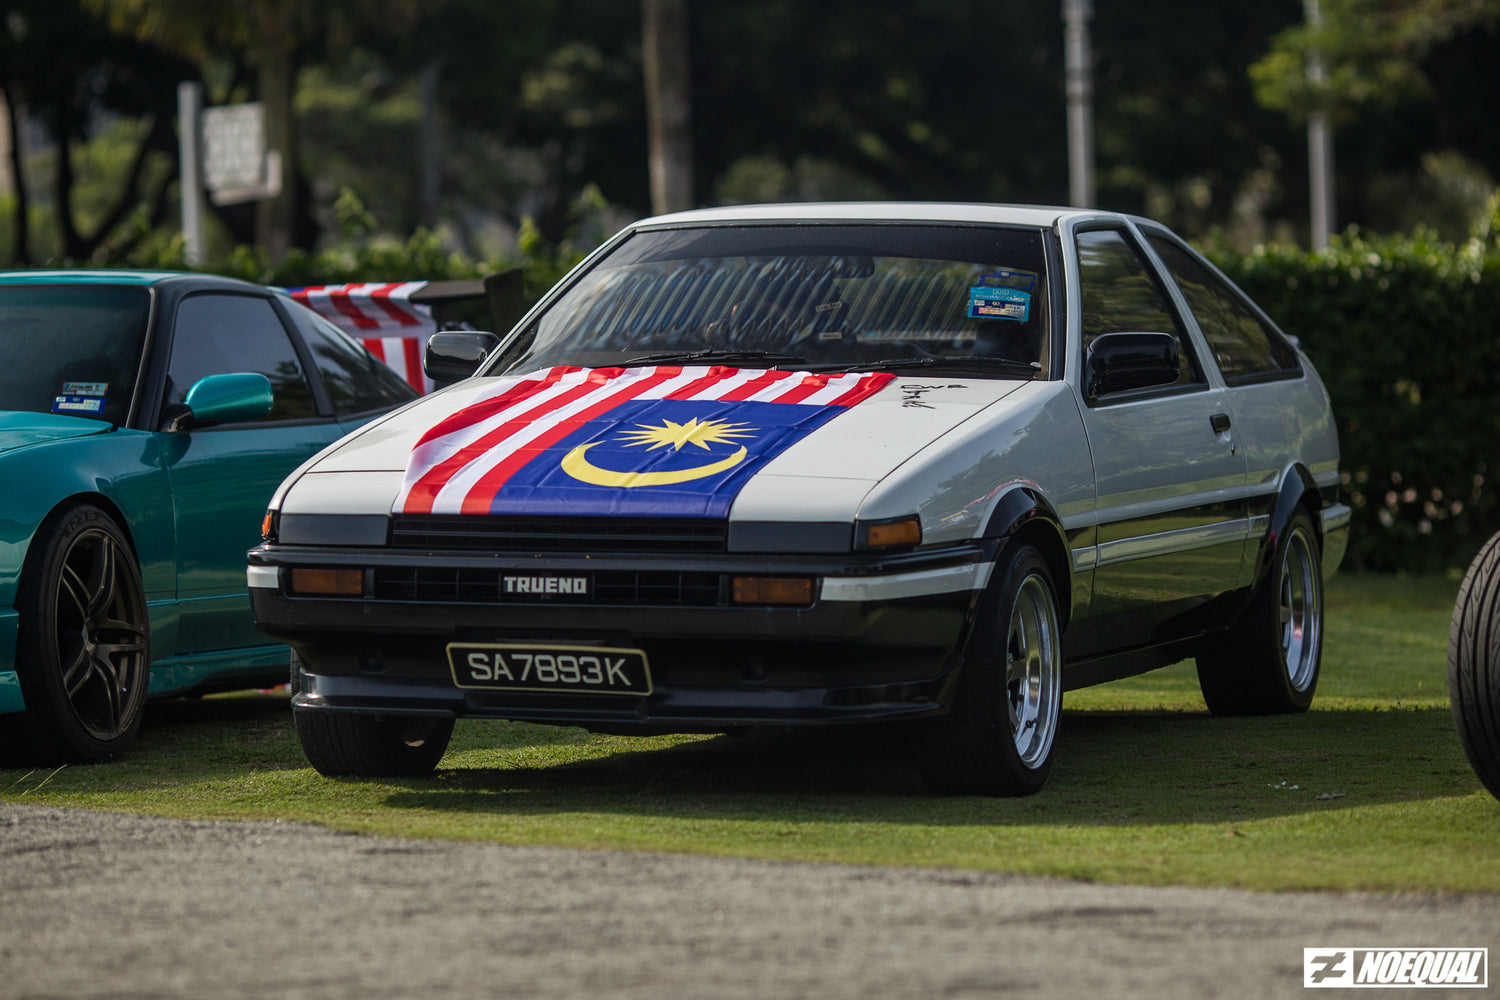 Mission Impossible : 35,000 KM World Tour in an AE86?